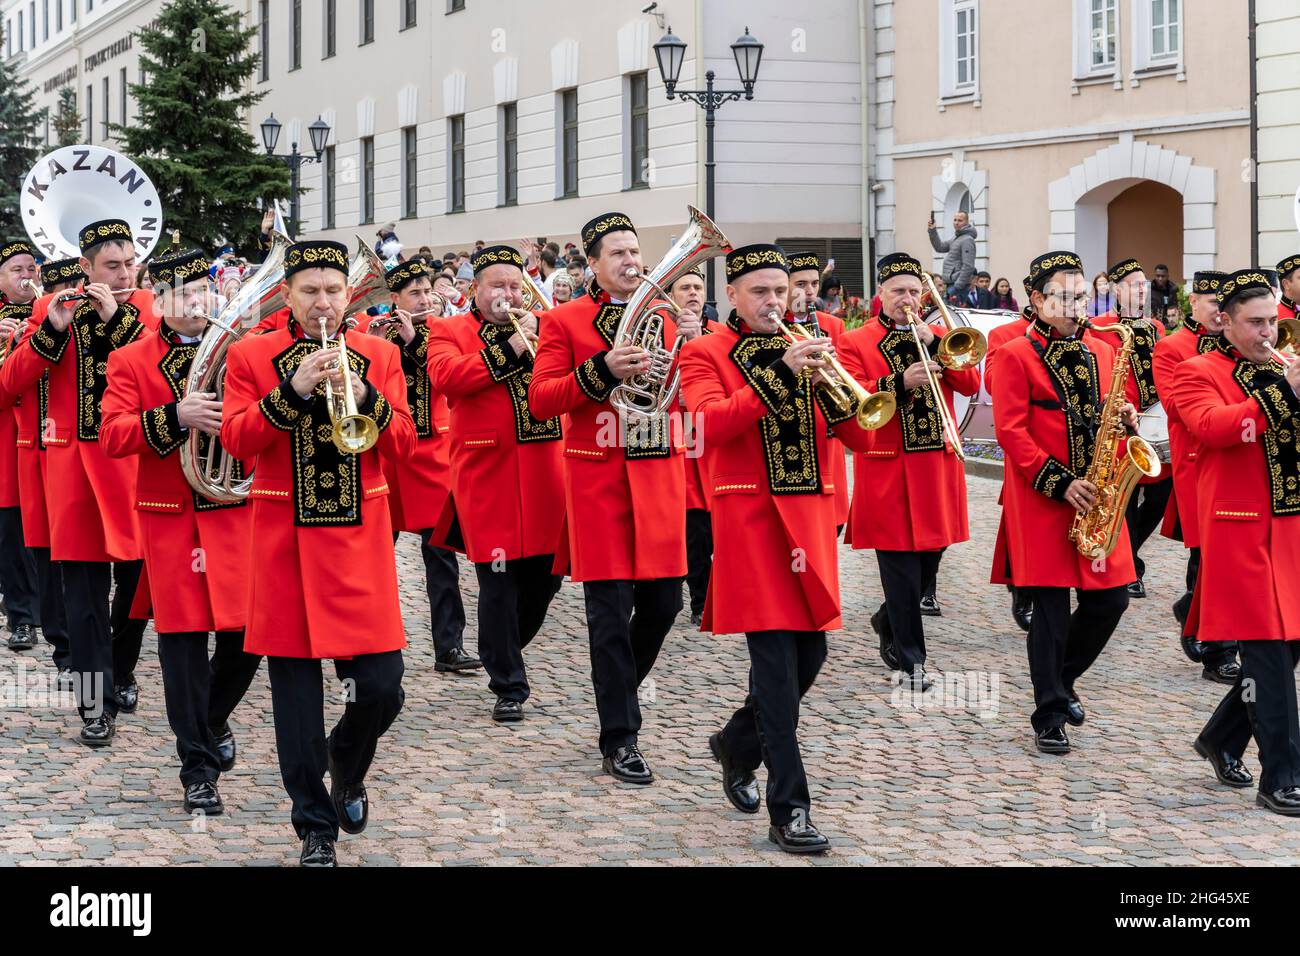 Kazan, Russia - September 21, 2019: Music and brass band with red costums in the streets of Kazan  Tartastan, Russia. Stock Photo